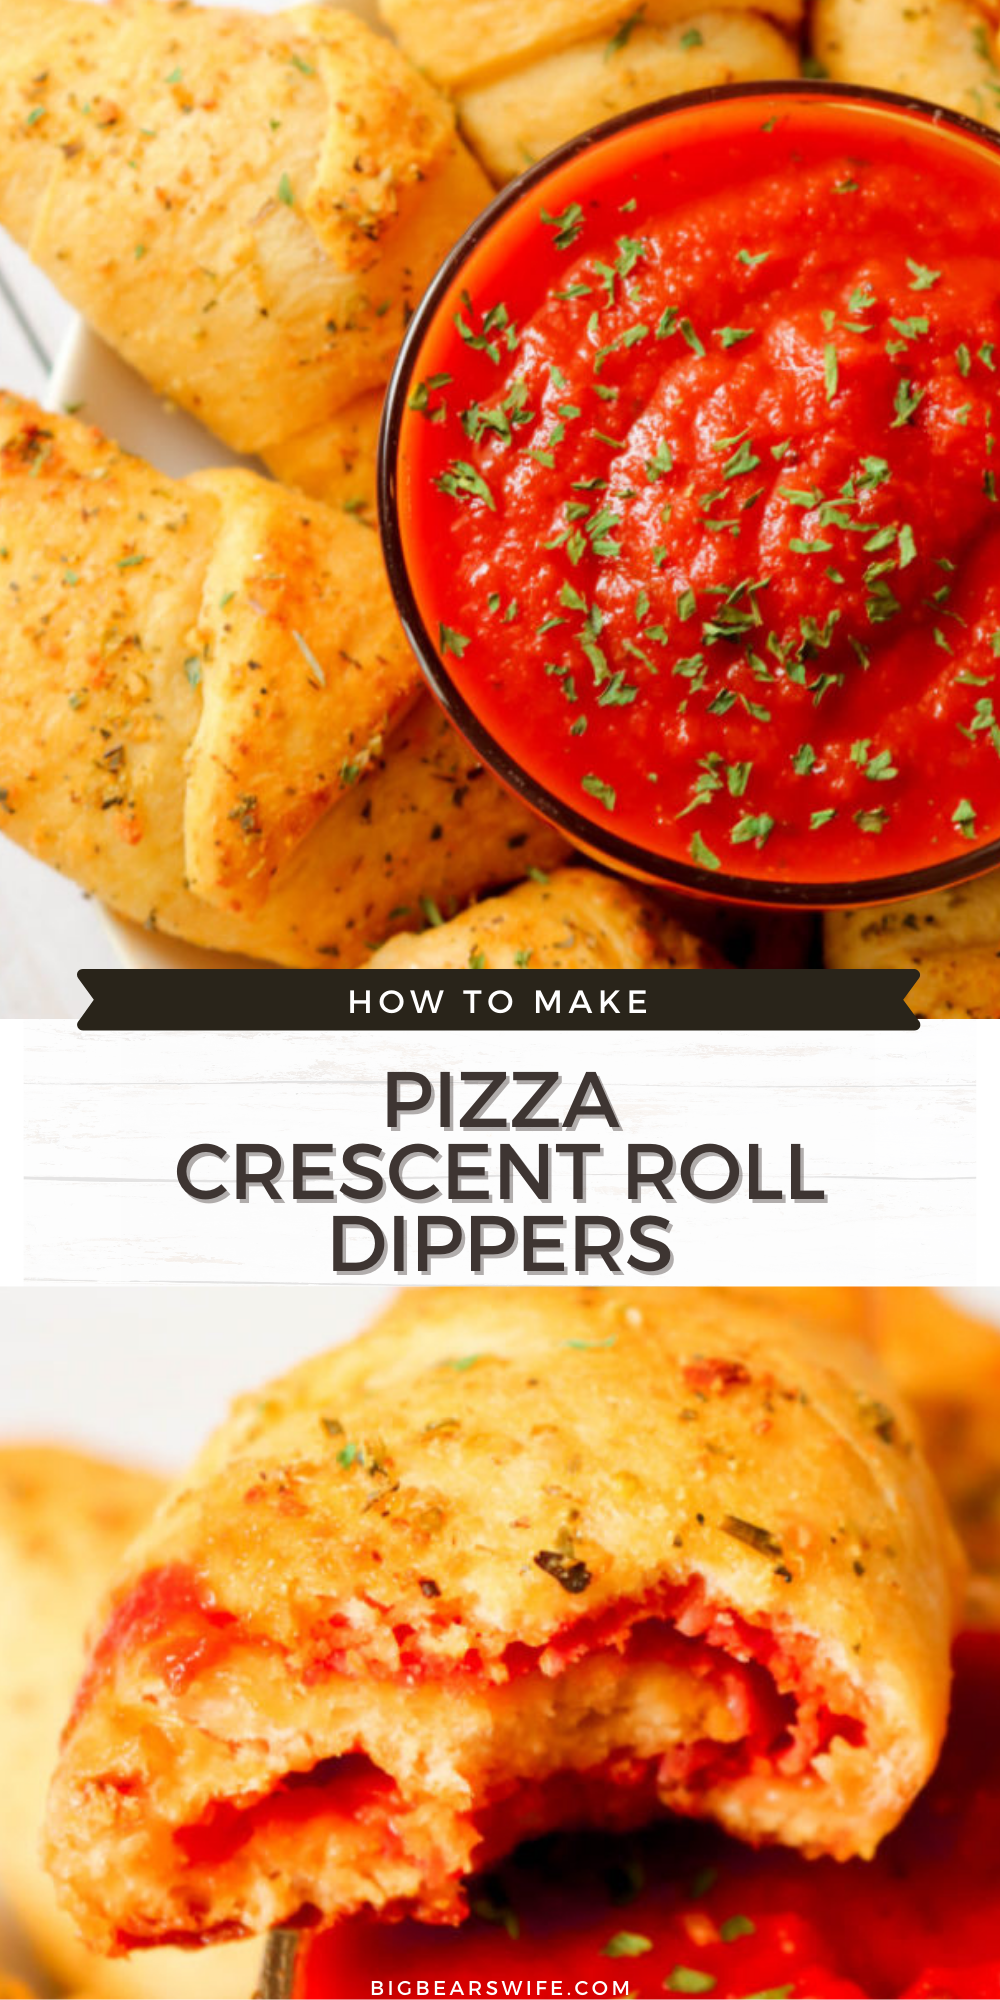 These Pizza Crescent Roll Dippers are tasty bites of pizza wrapped up in baked garlic olive oil brushed crescent rolls and dipped in marinara sauce. They make a great snack or an easy lunch or dinner! via @bigbearswife